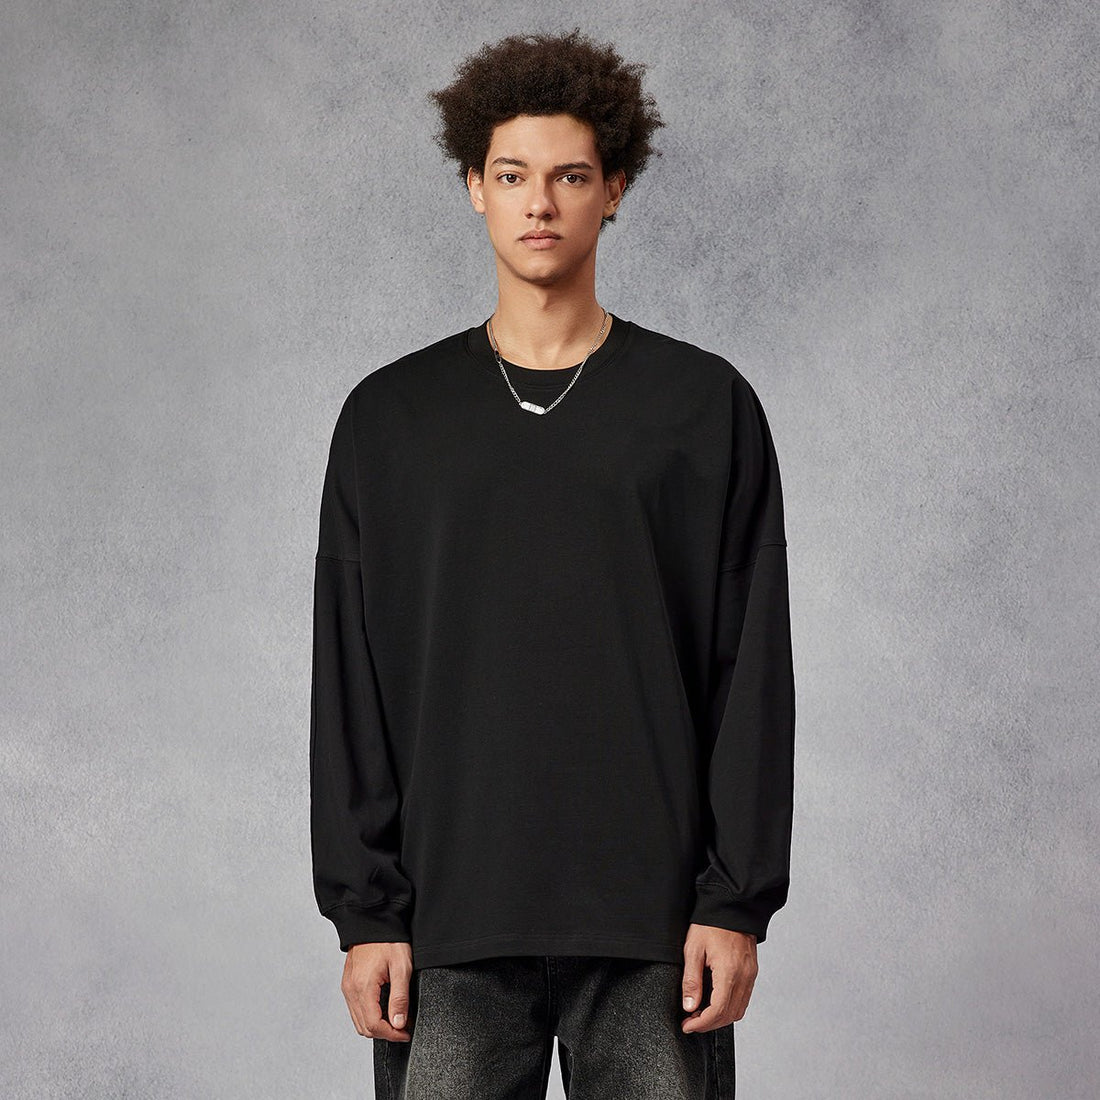 Relaxed Fit Heavyweight Long-sleeve Black Tee - 0cm